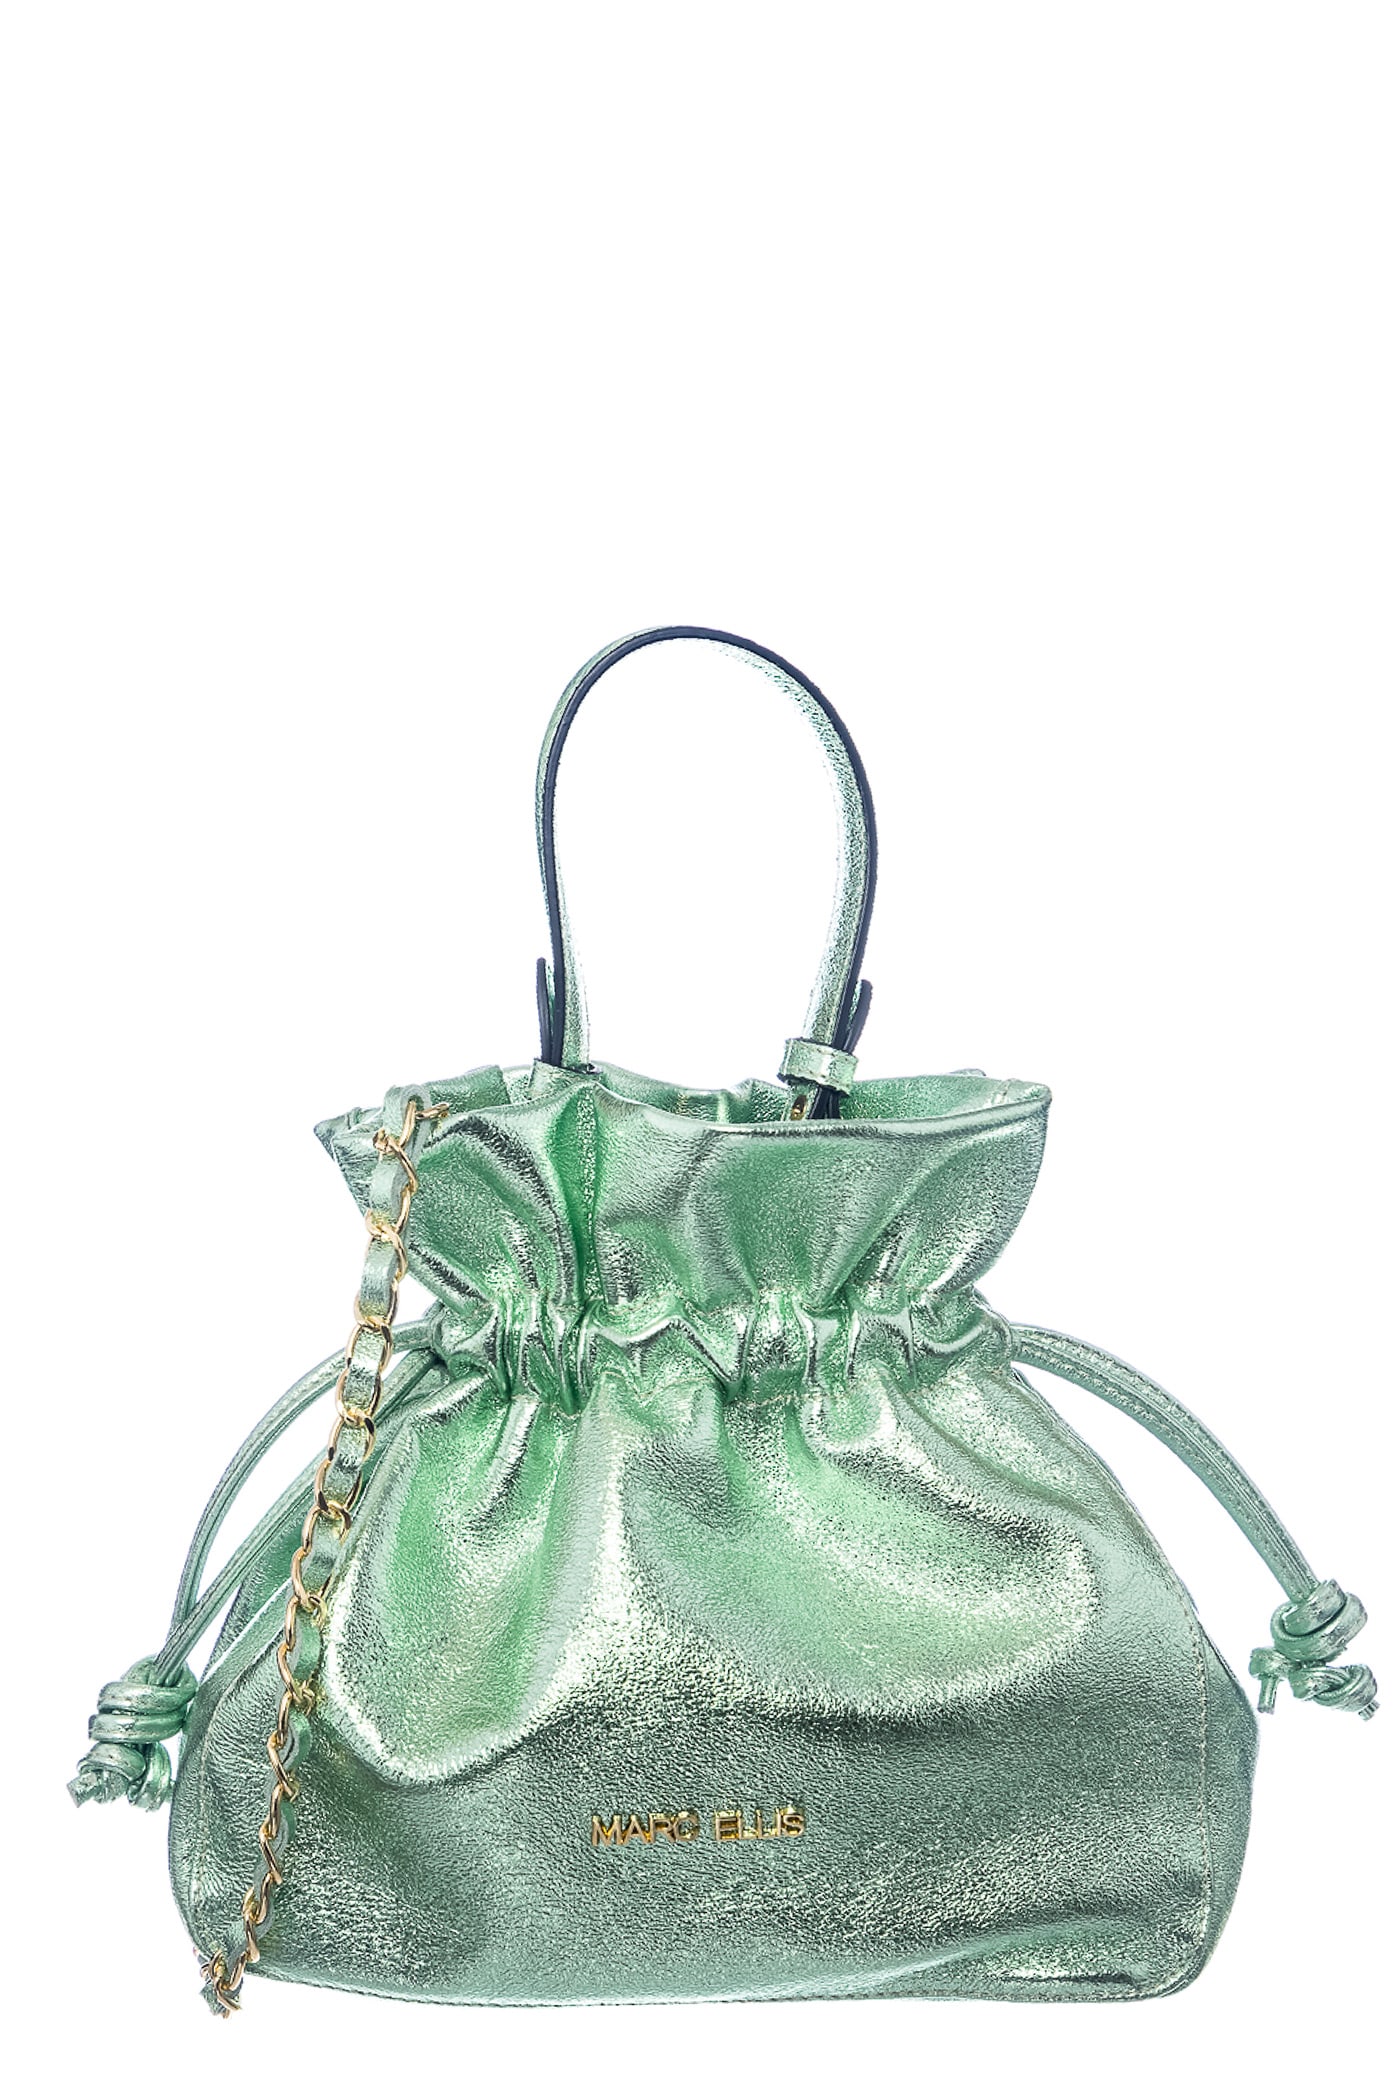 Marc Ellis Concy Piper Hand Bag In Green Leather